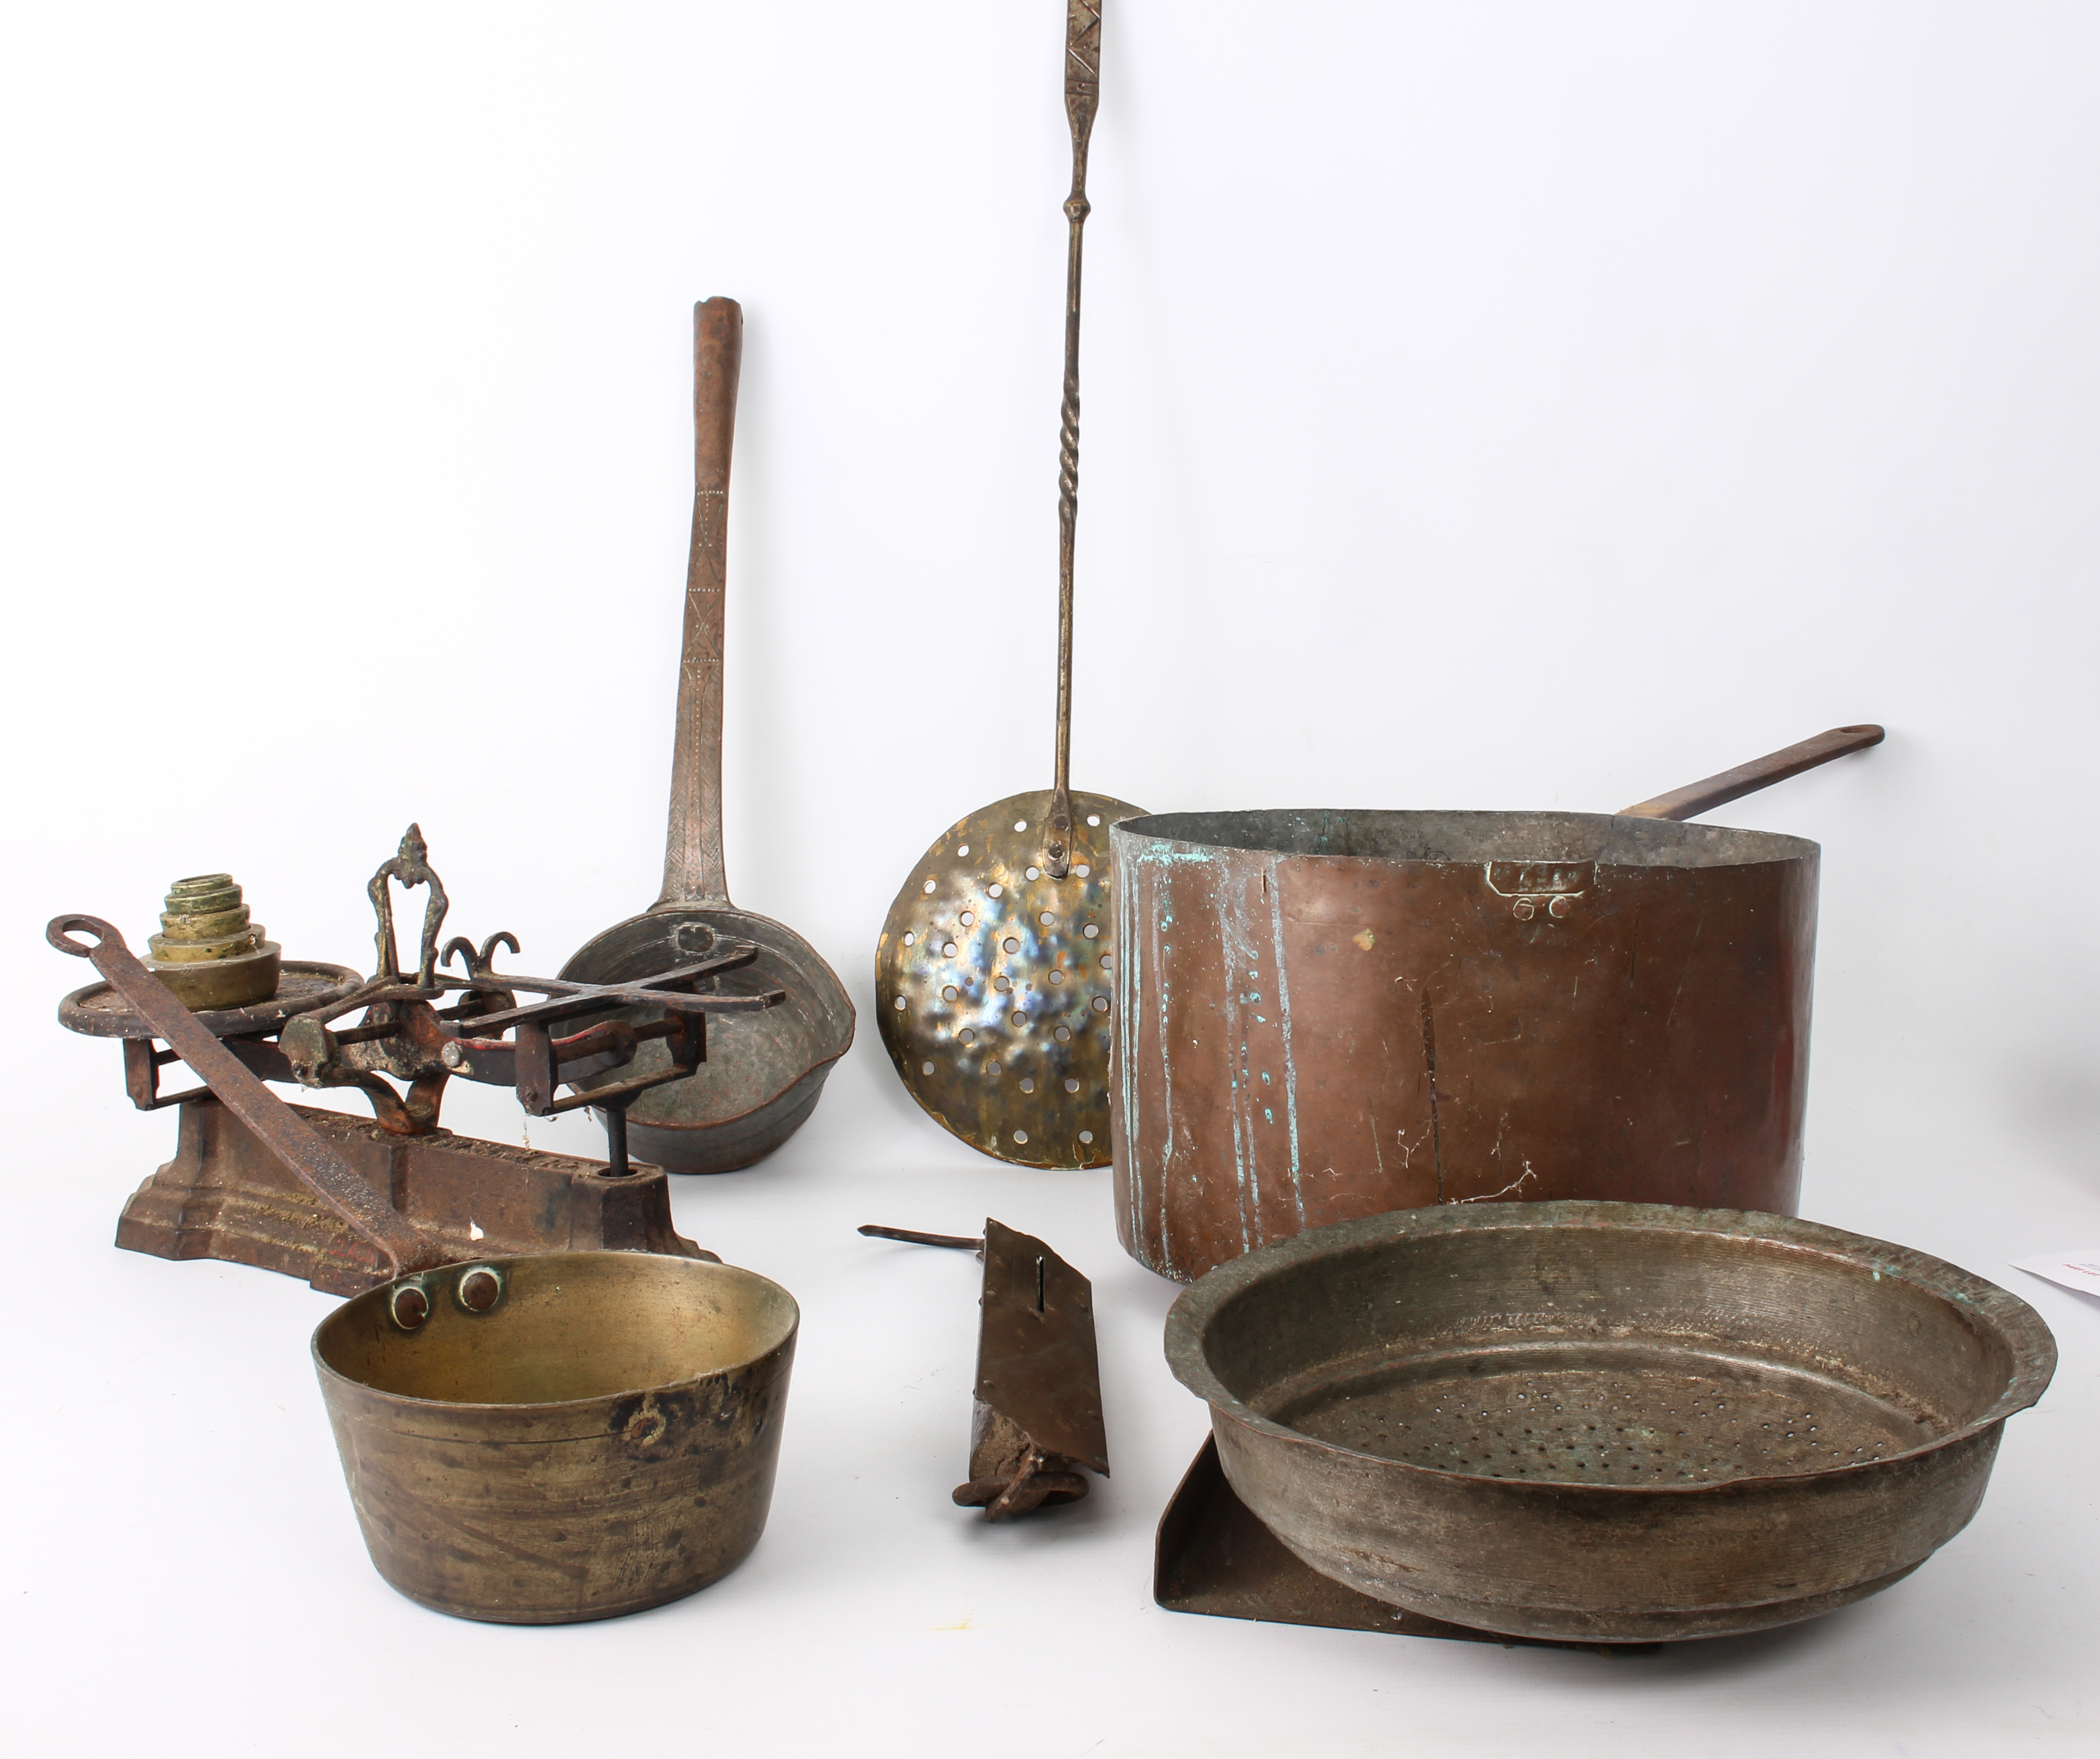 Seven pieces of copper and brass ware: a large copper and wrought iron 30 cm sauce pan; a smaller